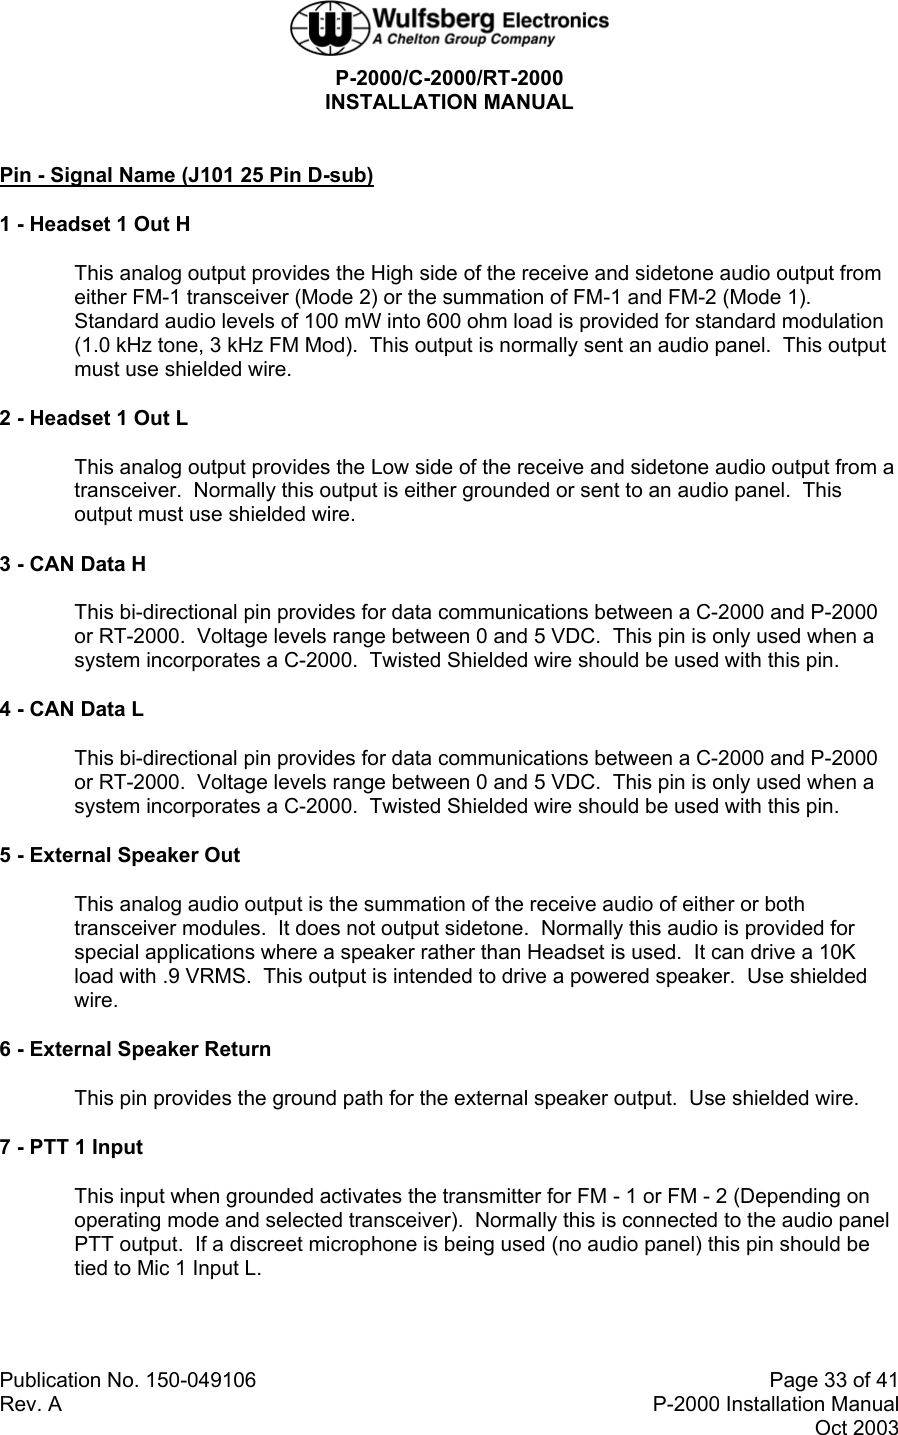  P-2000/C-2000/RT-2000 INSTALLATION MANUAL  Publication No. 150-049106  Page 33 of 41 Rev. A  P-2000 Installation Manual Oct 2003  Pin - Signal Name (J101 25 Pin D-sub) 1 - Headset 1 Out H This analog output provides the High side of the receive and sidetone audio output from either FM-1 transceiver (Mode 2) or the summation of FM-1 and FM-2 (Mode 1).    Standard audio levels of 100 mW into 600 ohm load is provided for standard modulation (1.0 kHz tone, 3 kHz FM Mod).  This output is normally sent an audio panel.  This output must use shielded wire. 2 - Headset 1 Out L This analog output provides the Low side of the receive and sidetone audio output from a transceiver.  Normally this output is either grounded or sent to an audio panel.  This output must use shielded wire. 3 - CAN Data H This bi-directional pin provides for data communications between a C-2000 and P-2000 or RT-2000.  Voltage levels range between 0 and 5 VDC.  This pin is only used when a system incorporates a C-2000.  Twisted Shielded wire should be used with this pin. 4 - CAN Data L This bi-directional pin provides for data communications between a C-2000 and P-2000 or RT-2000.  Voltage levels range between 0 and 5 VDC.  This pin is only used when a system incorporates a C-2000.  Twisted Shielded wire should be used with this pin. 5 - External Speaker Out This analog audio output is the summation of the receive audio of either or both transceiver modules.  It does not output sidetone.  Normally this audio is provided for special applications where a speaker rather than Headset is used.  It can drive a 10K load with .9 VRMS.  This output is intended to drive a powered speaker.  Use shielded wire. 6 - External Speaker Return This pin provides the ground path for the external speaker output.  Use shielded wire. 7 - PTT 1 Input This input when grounded activates the transmitter for FM - 1 or FM - 2 (Depending on operating mode and selected transceiver).  Normally this is connected to the audio panel PTT output.  If a discreet microphone is being used (no audio panel) this pin should be tied to Mic 1 Input L. 